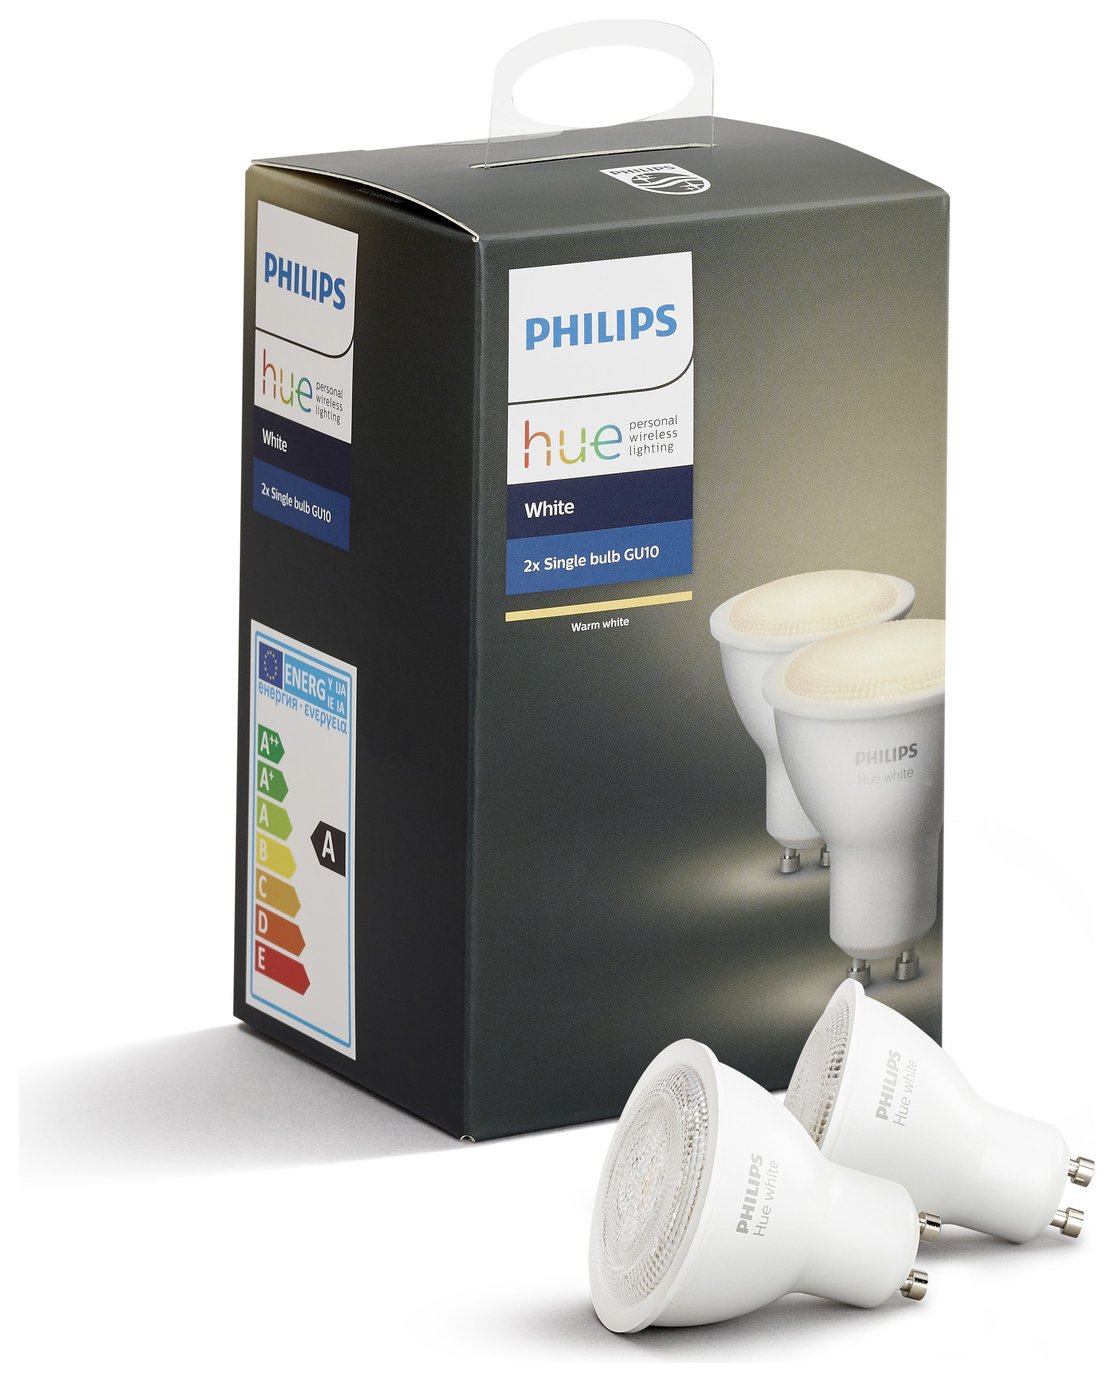 Philips Hue White GU10 Bulb Twin Pack review